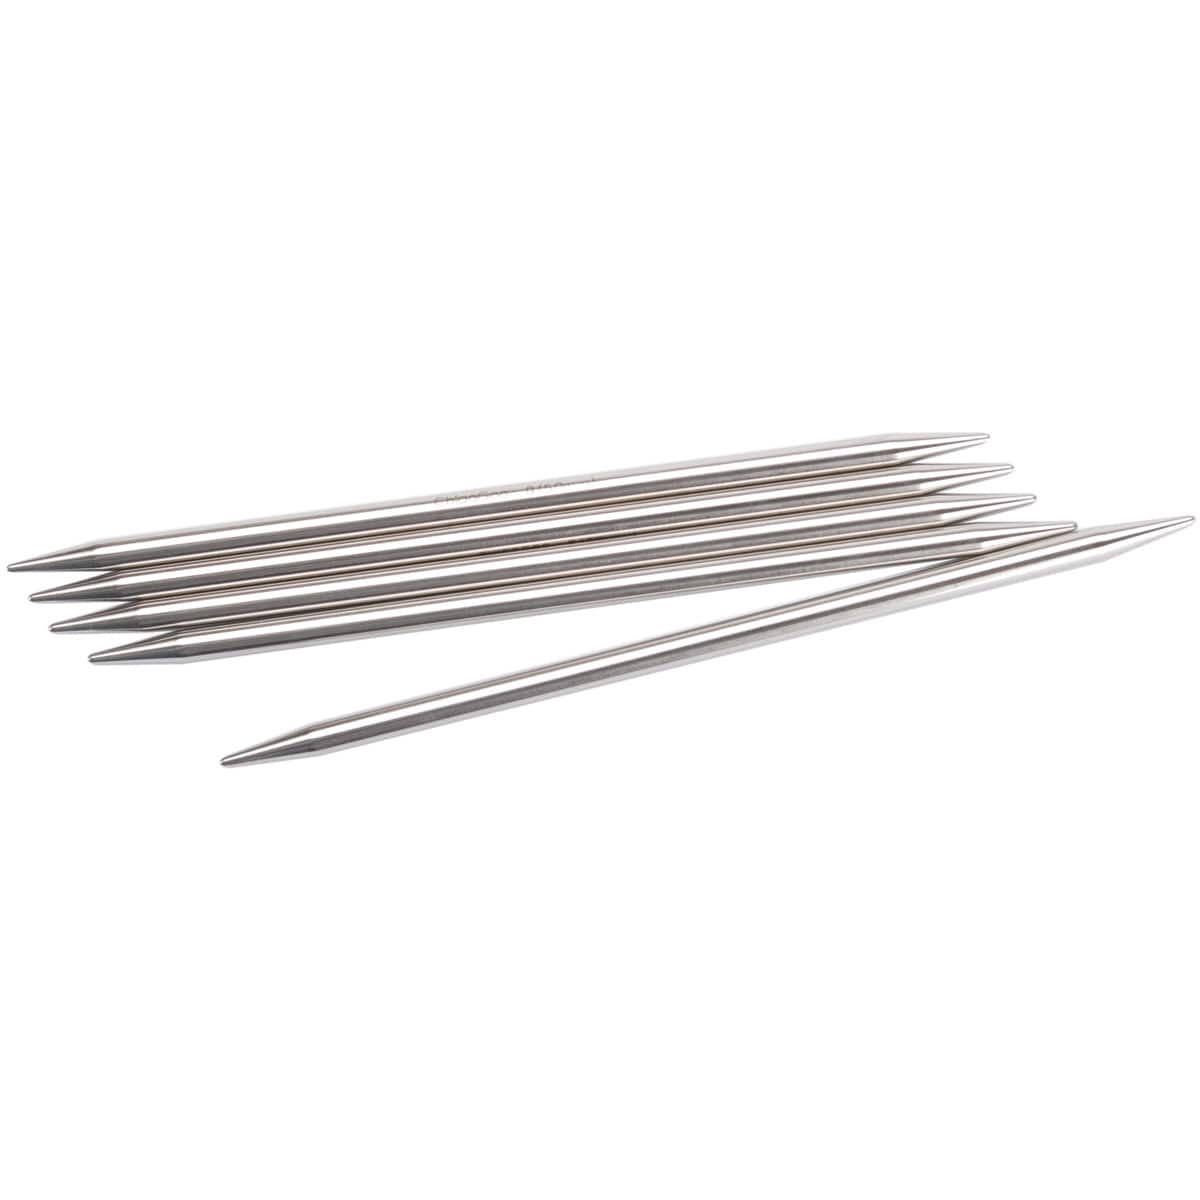 HiyaHiya 6 Stainless Steel Double Pointed Knitting Needles Set of 5 US  2.5/ 3mm